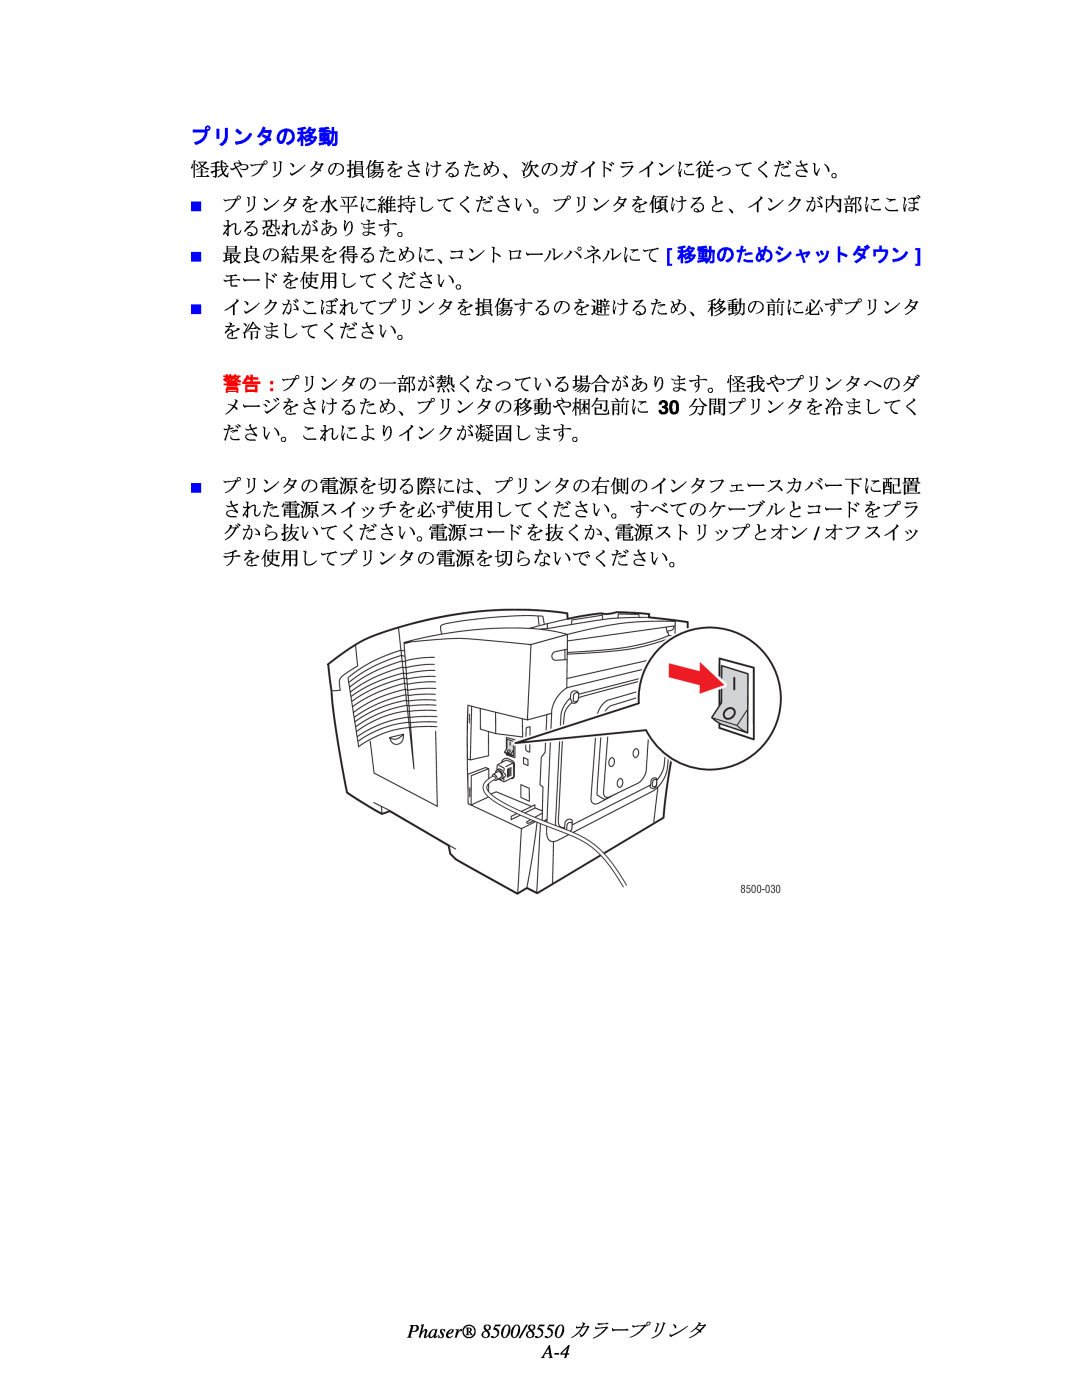 Xerox manual プ リ ン タの移動, Phaser 8500/8550 カ ラープ リ ン タ A-4 